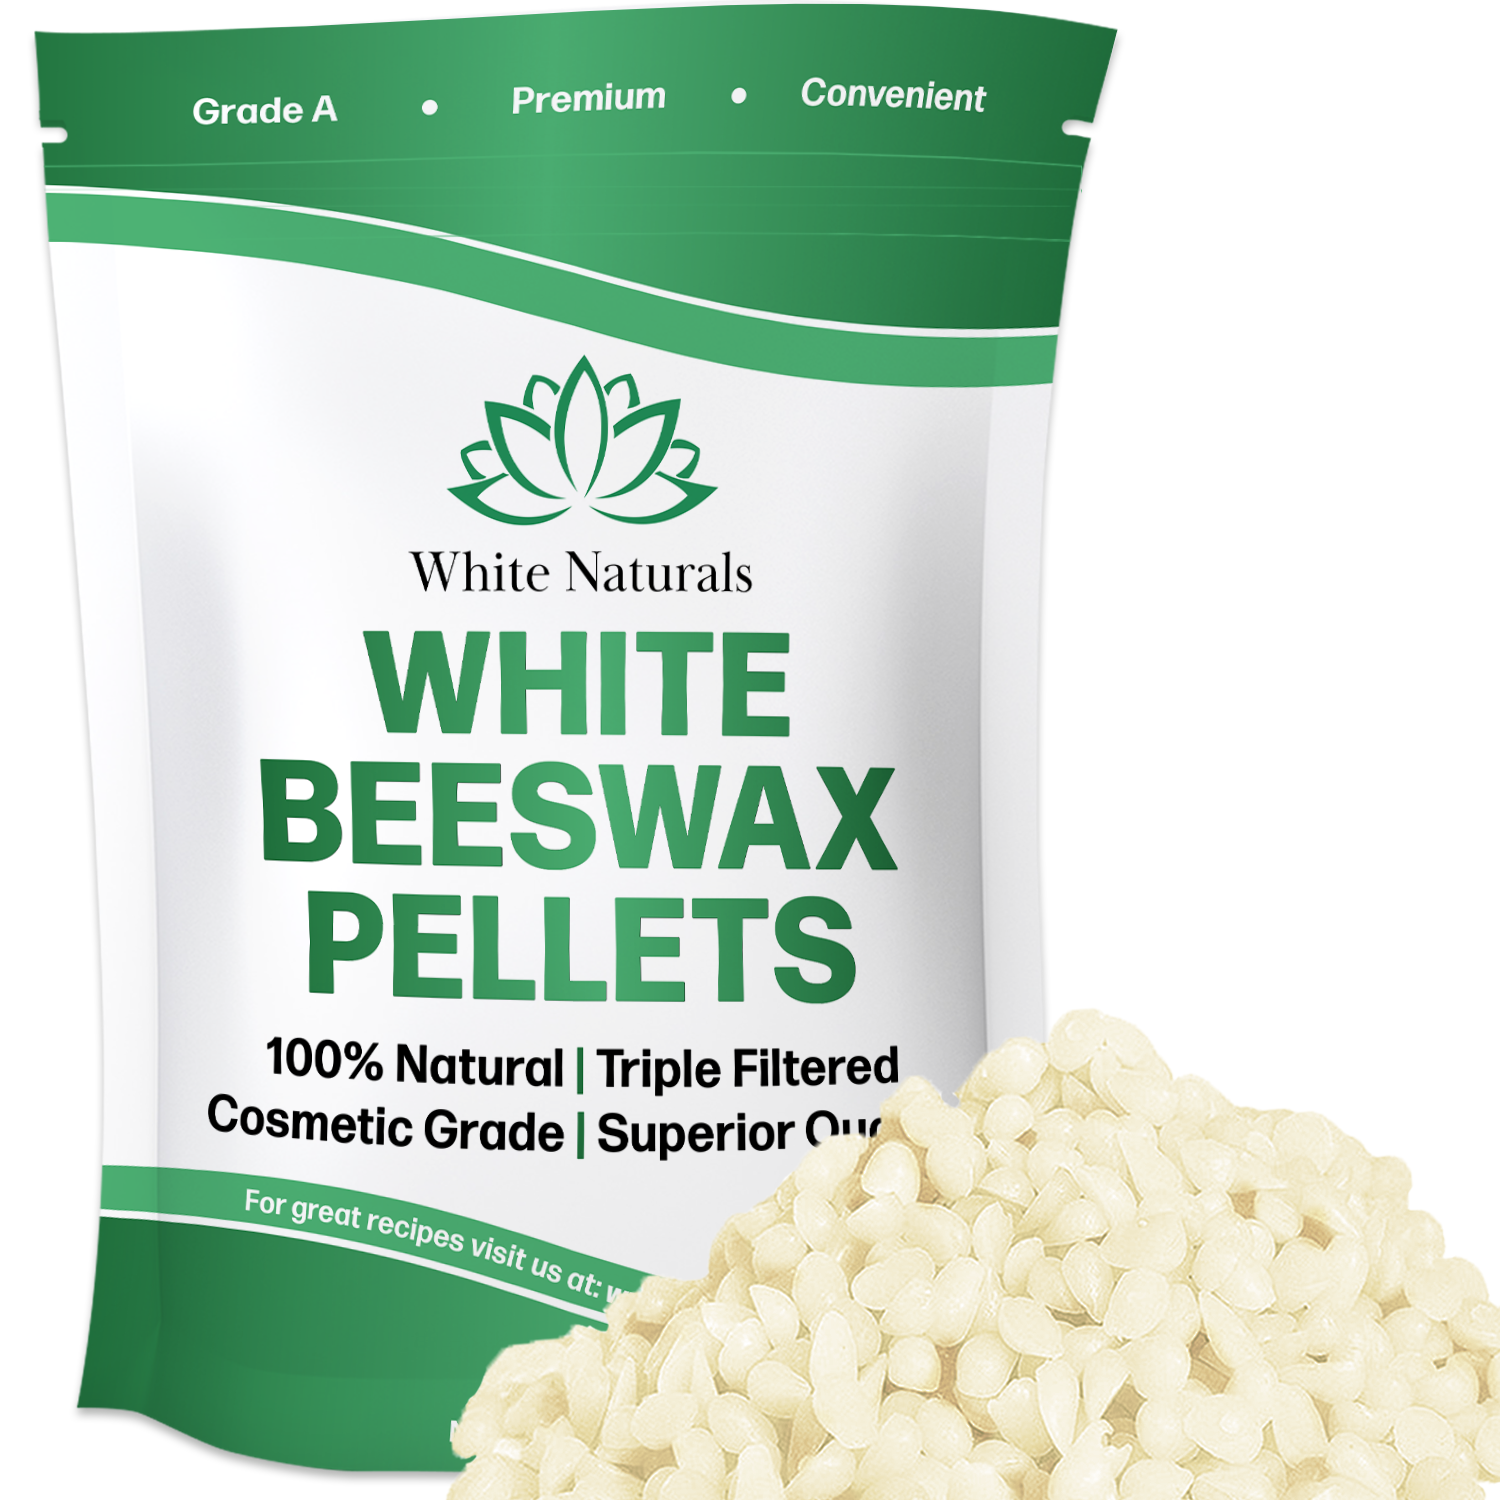 CARGEN Natural Beeswax Pellets - 453g White Beeswax Niger